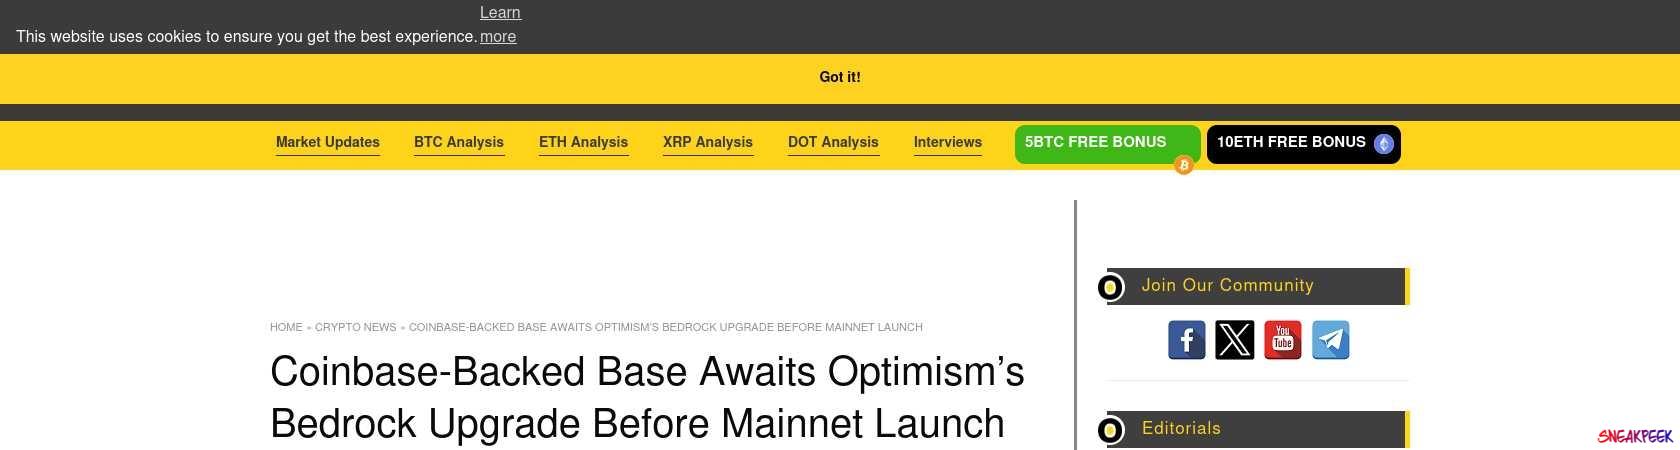 Read the full Article:  ⭲ Coinbase-Backed Base Awaits Optimism’s Bedrock Upgrade Before Mainnet Launch